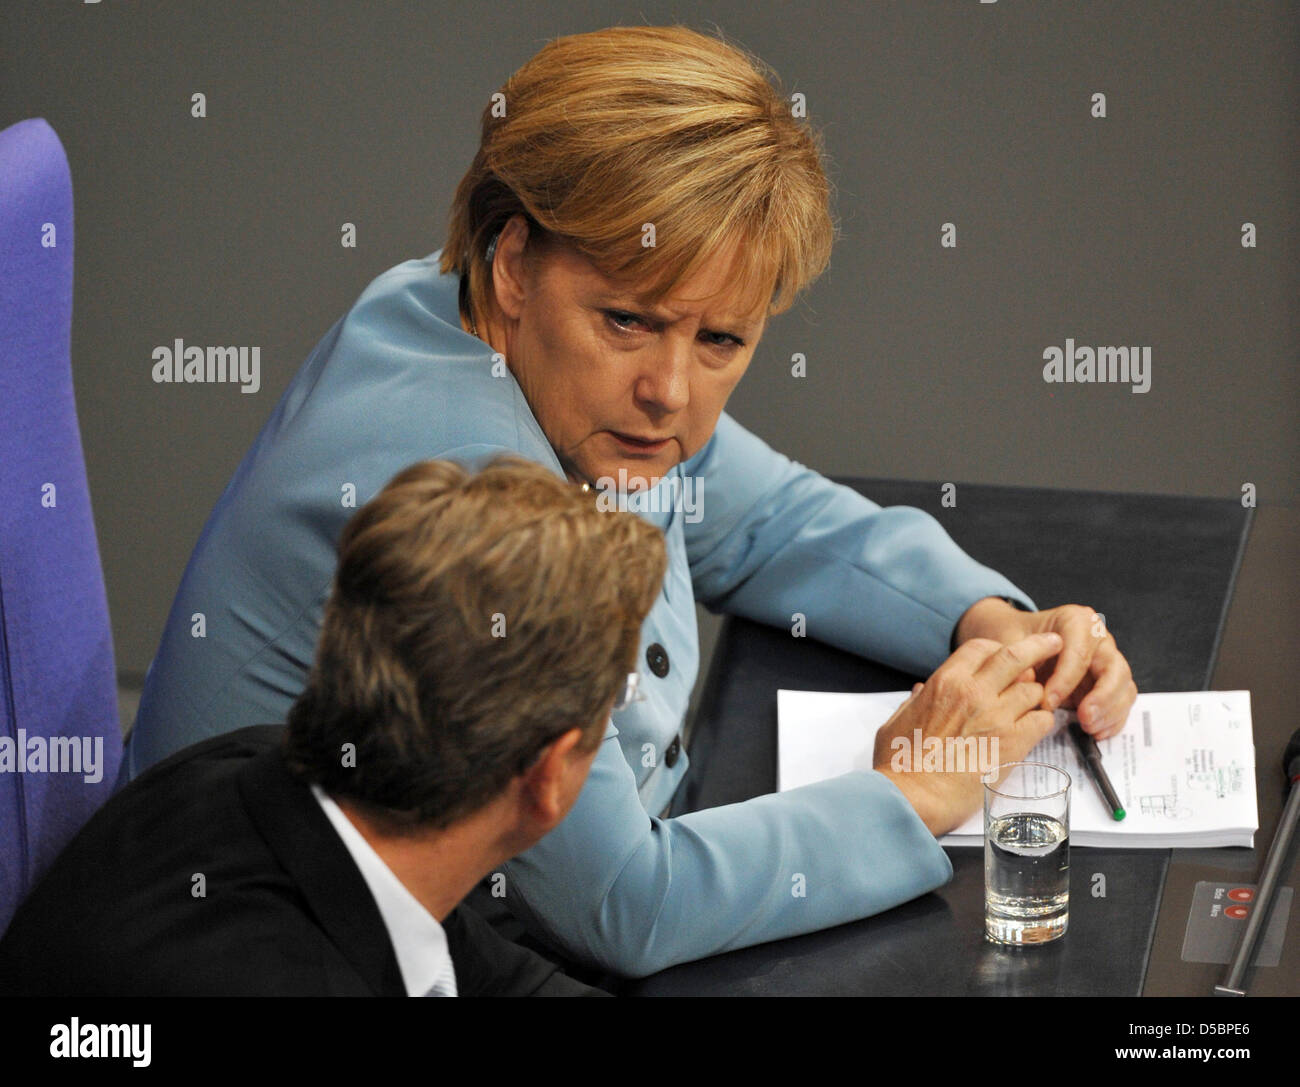 German Chancellor Angela Merkel and German Foreign Minister and Vice Chancellor Guido Westerwelle attend a Bundestag (German Parliament) session at the Reichstag in Berlin, Germany, 14 September 2010. The German Parliament is discussing the controversial 2011 budget, which entails spending cuts adding up to 12 billion euros, mainly in social services. Photo: RAINER JENSEN Stock Photo